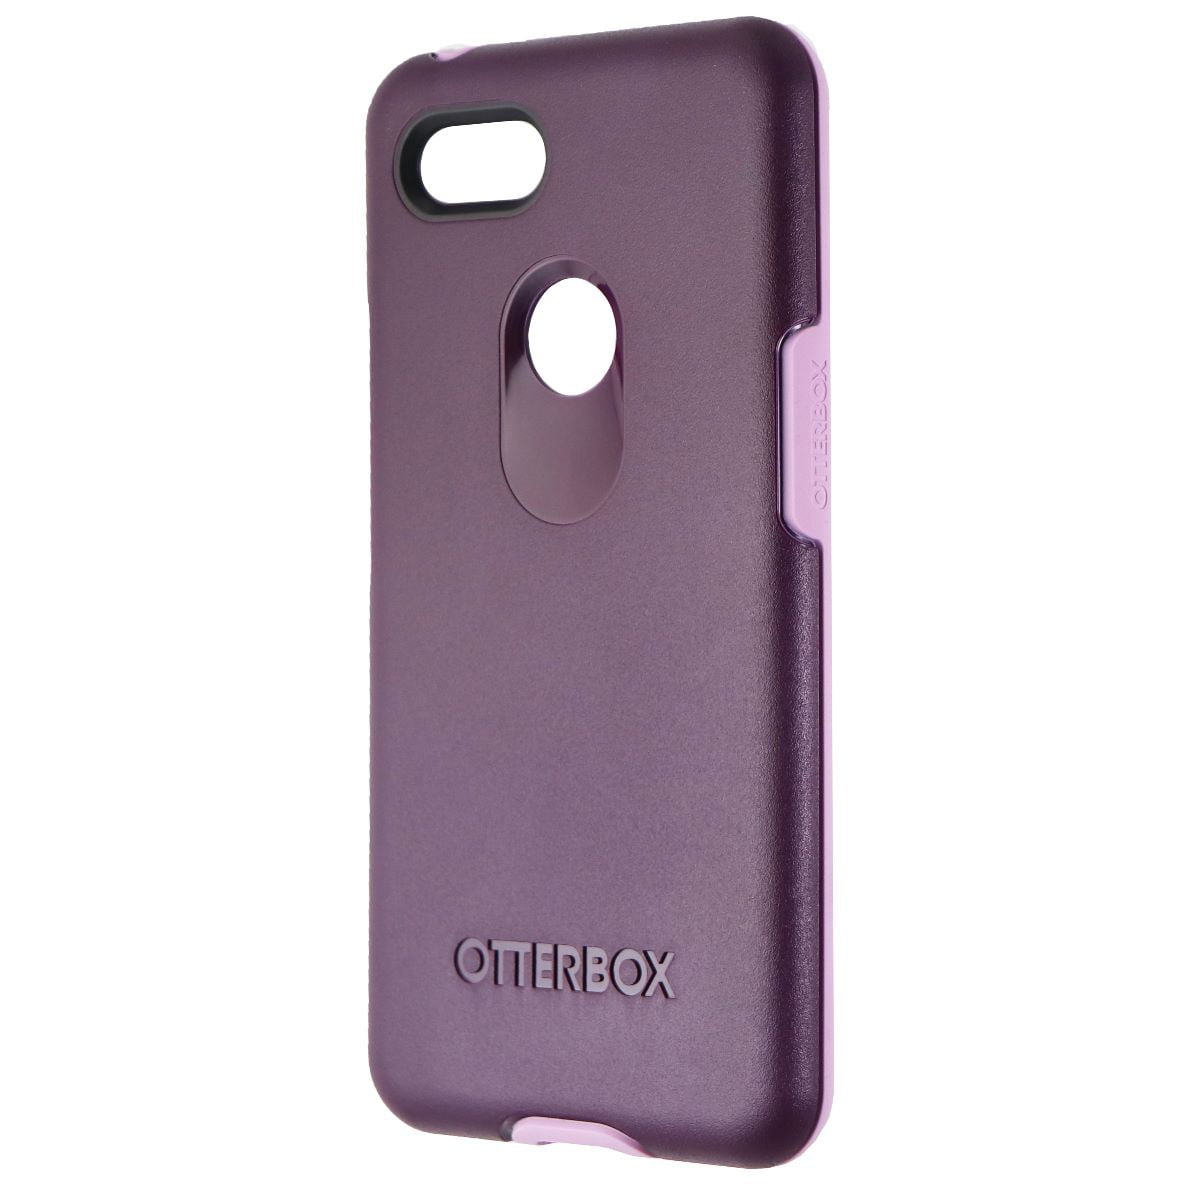 OTTERBOX Symmetry Case Sleek Cover for Google Pixel 2 XL Mermaid Tail Ey93 for sale online 